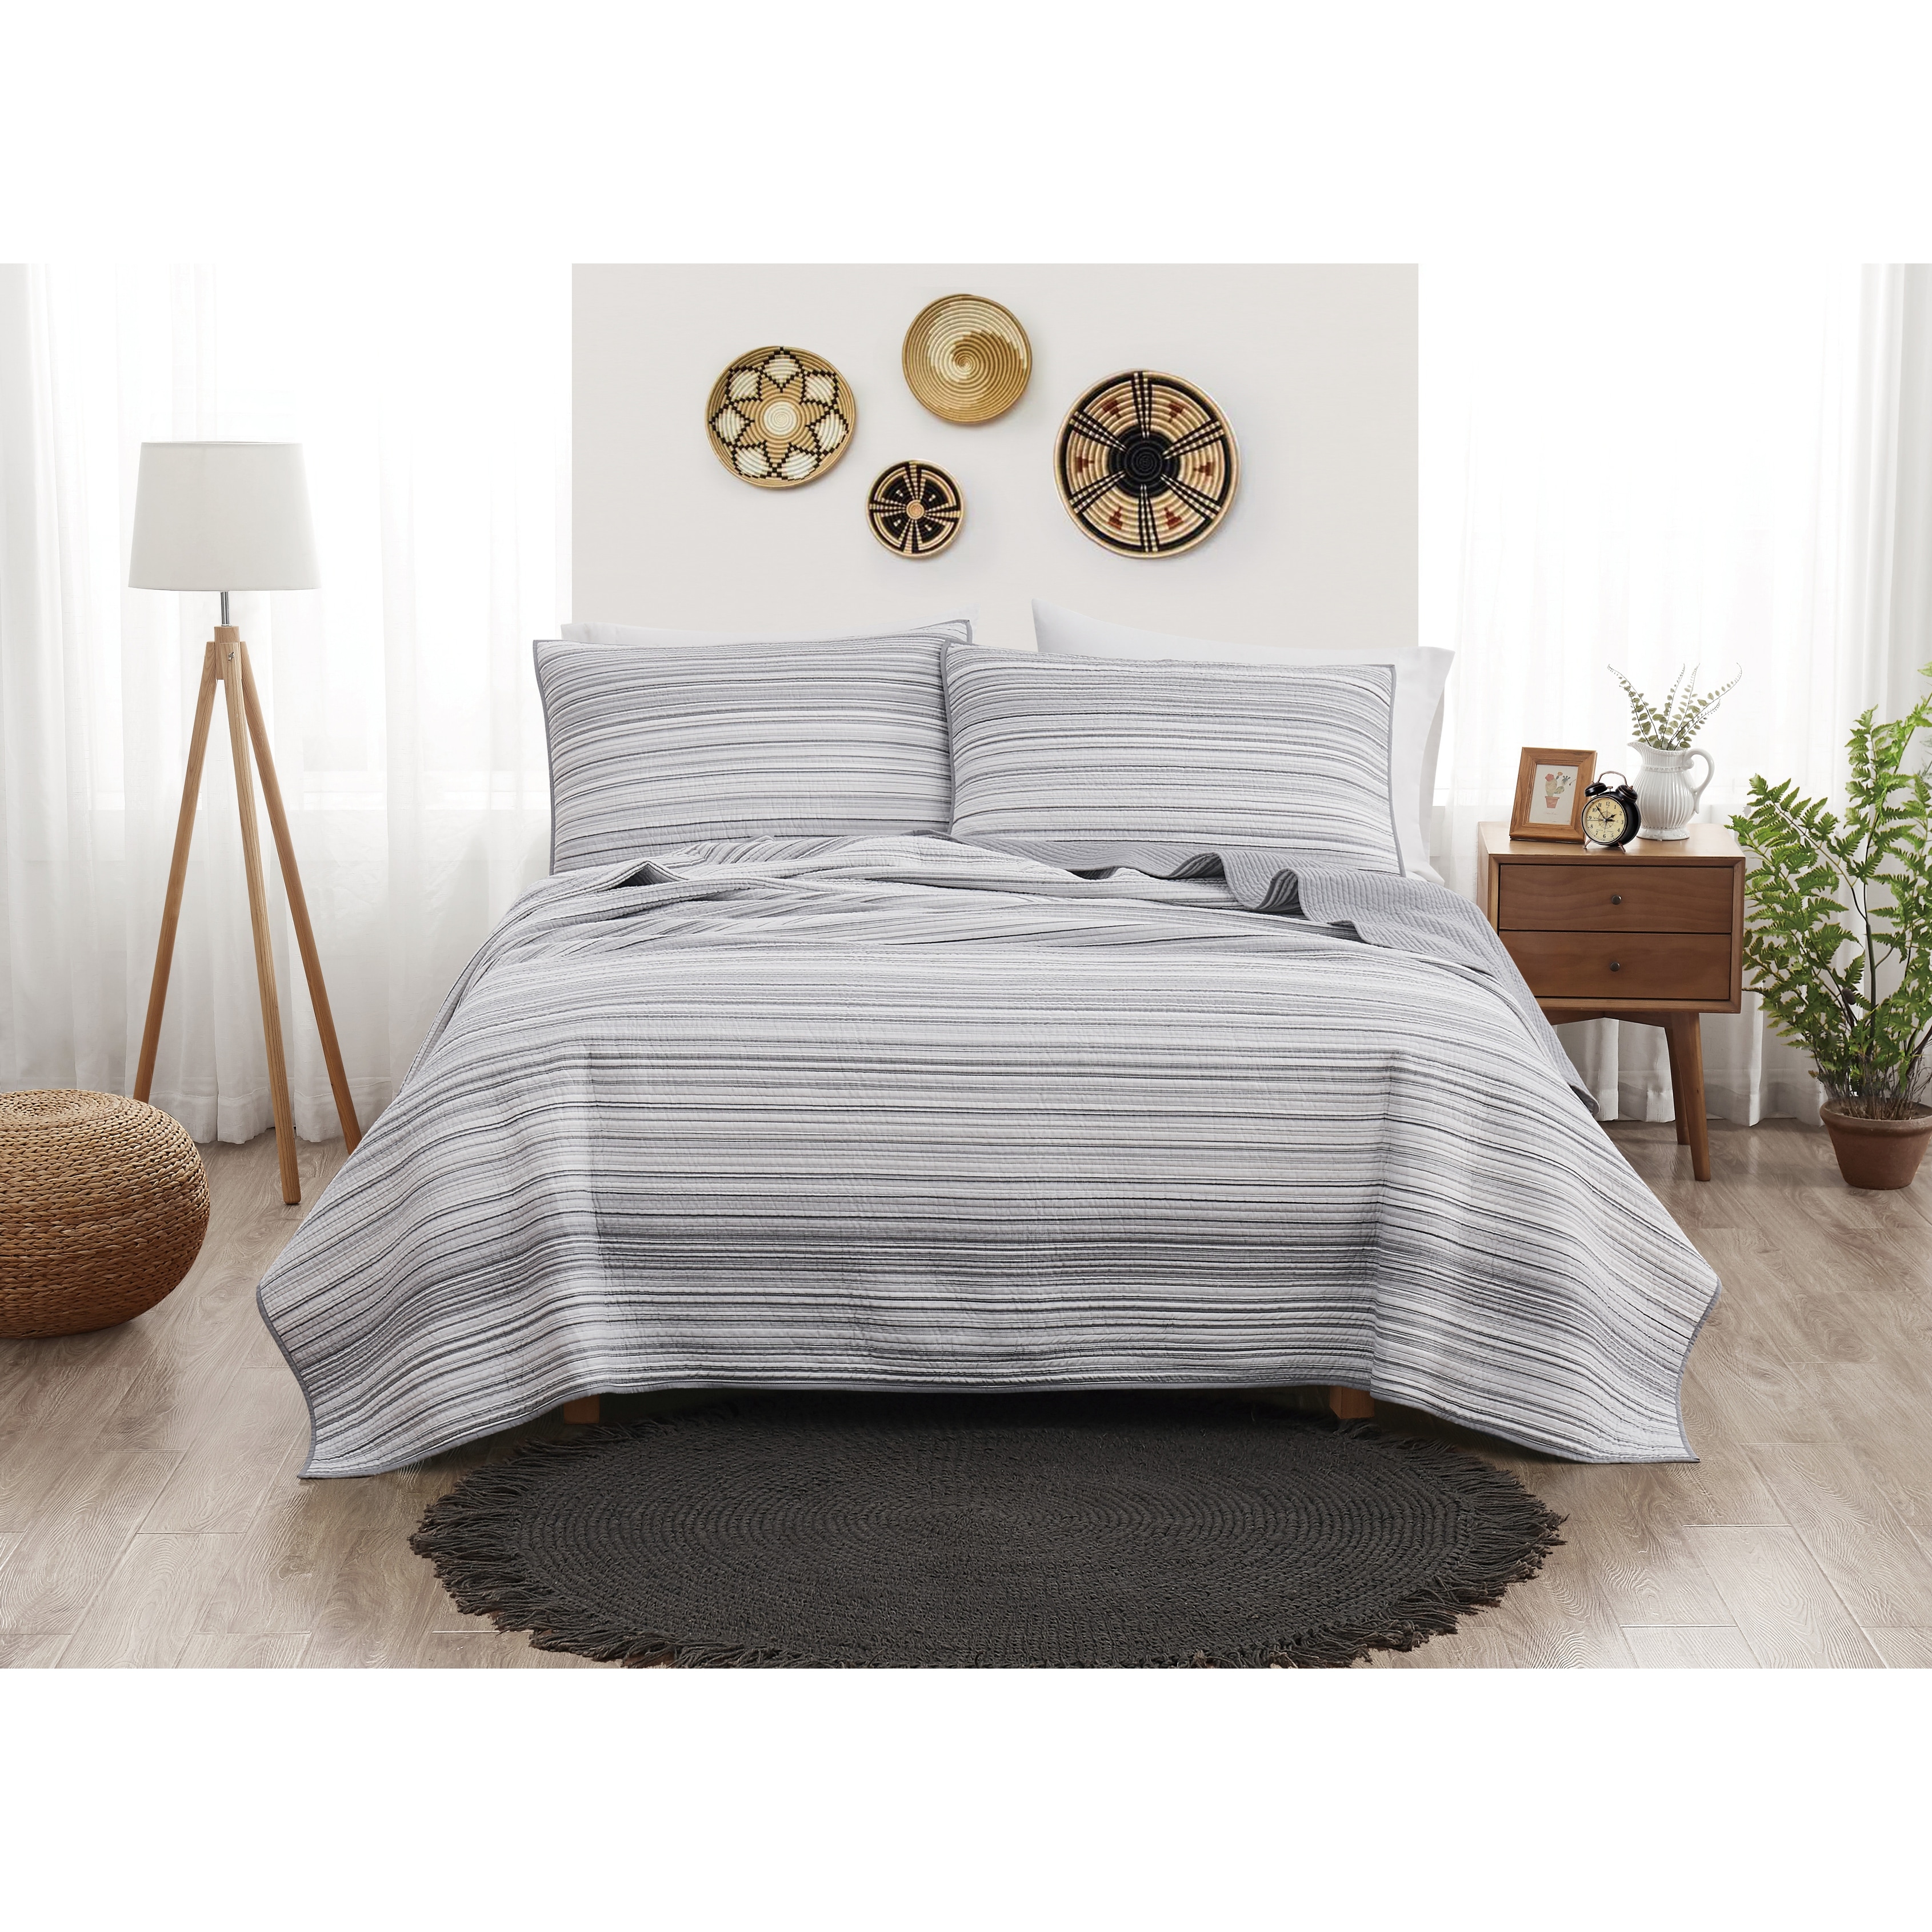 Grey Striped Quilts and Bedspreads - Bed Bath & Beyond